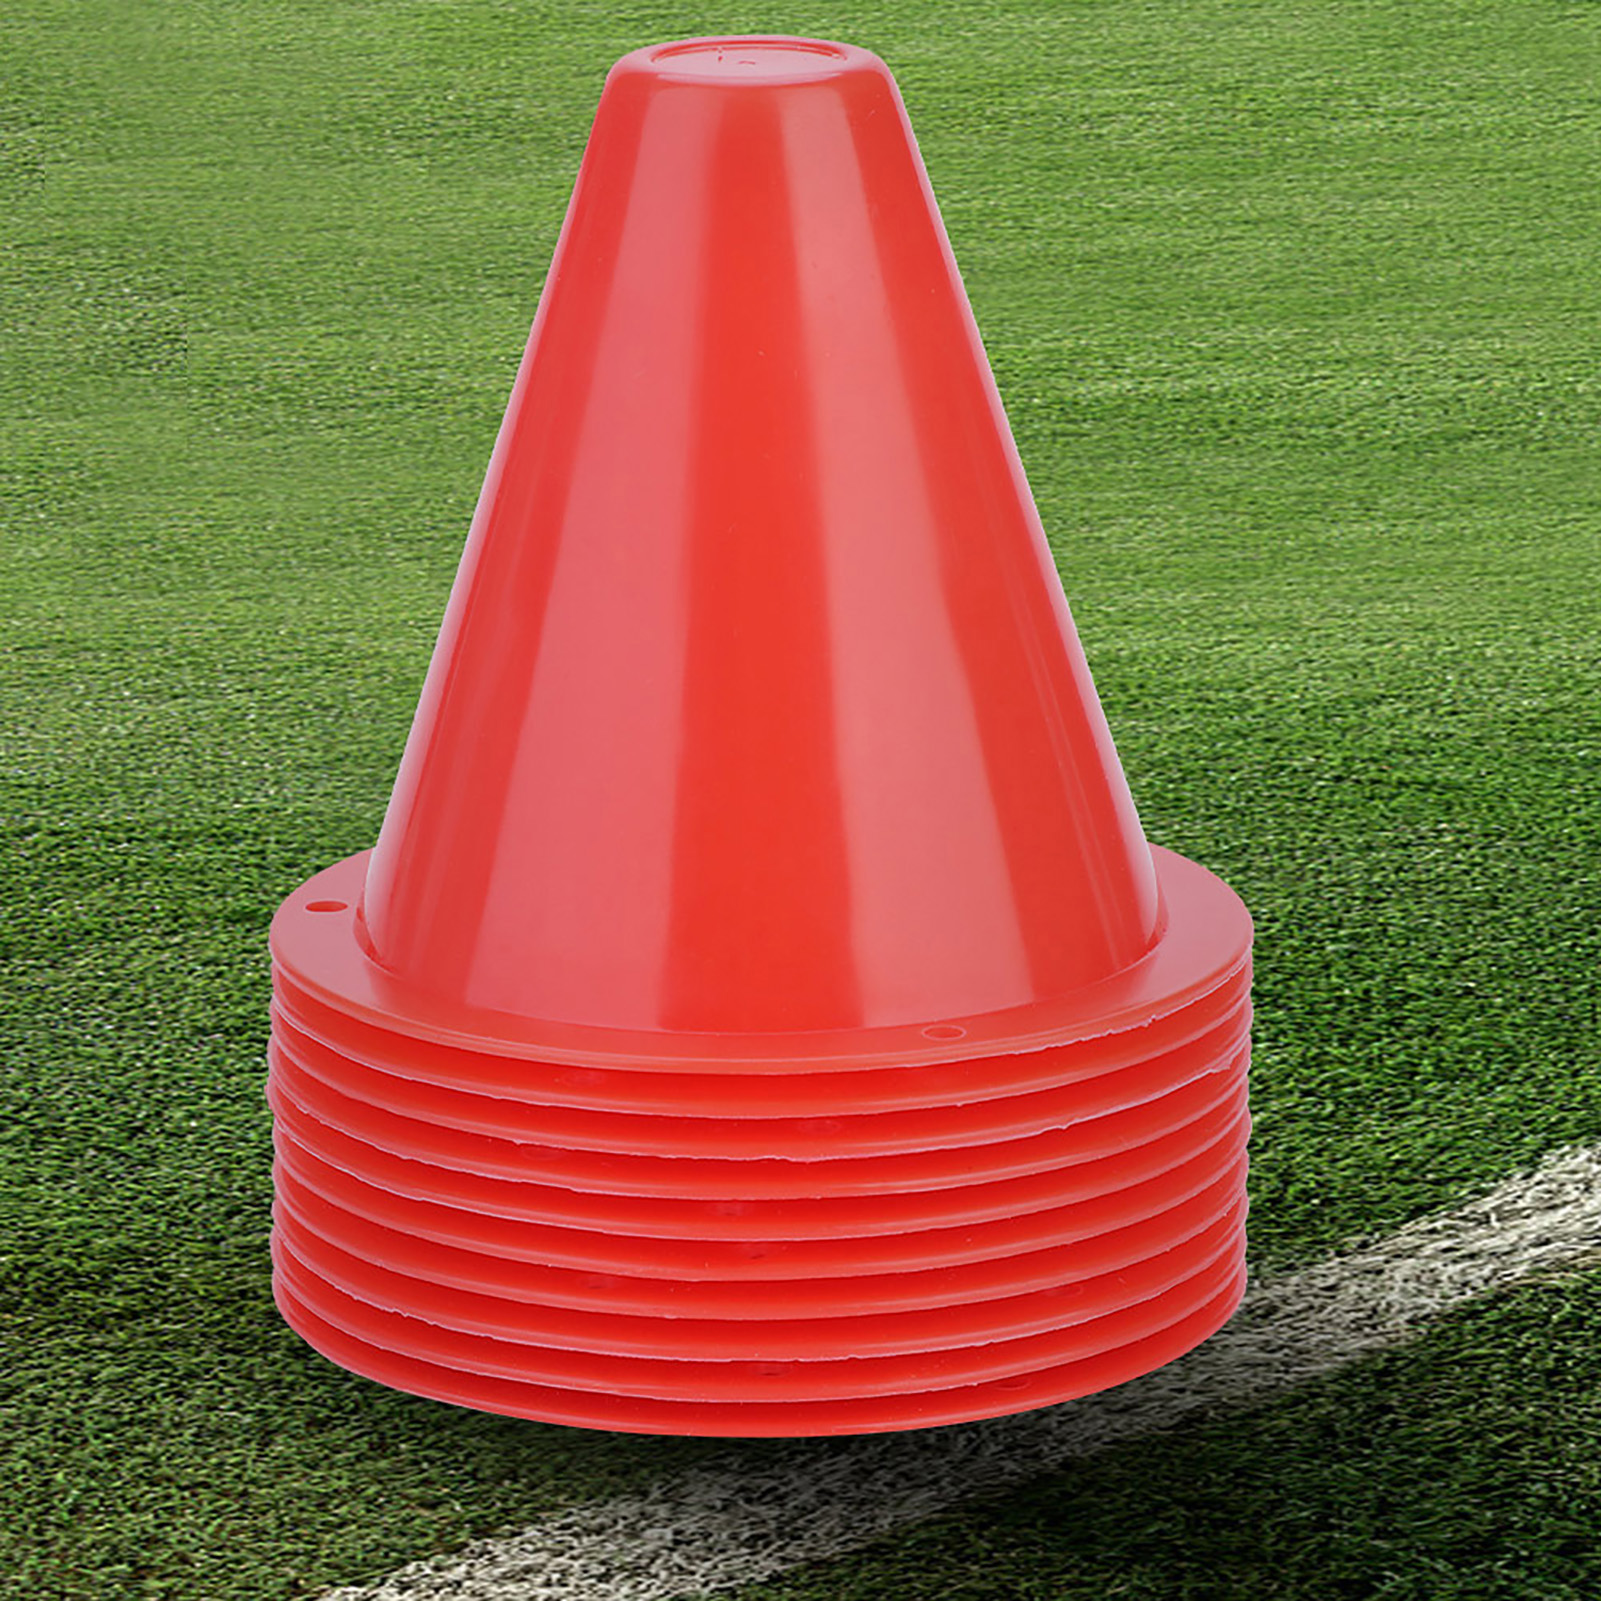 Soccer Training Cone 10 Pcs/Set 5 Colors Plastic Marker Football Barriers Training Cone Sports Accessory 